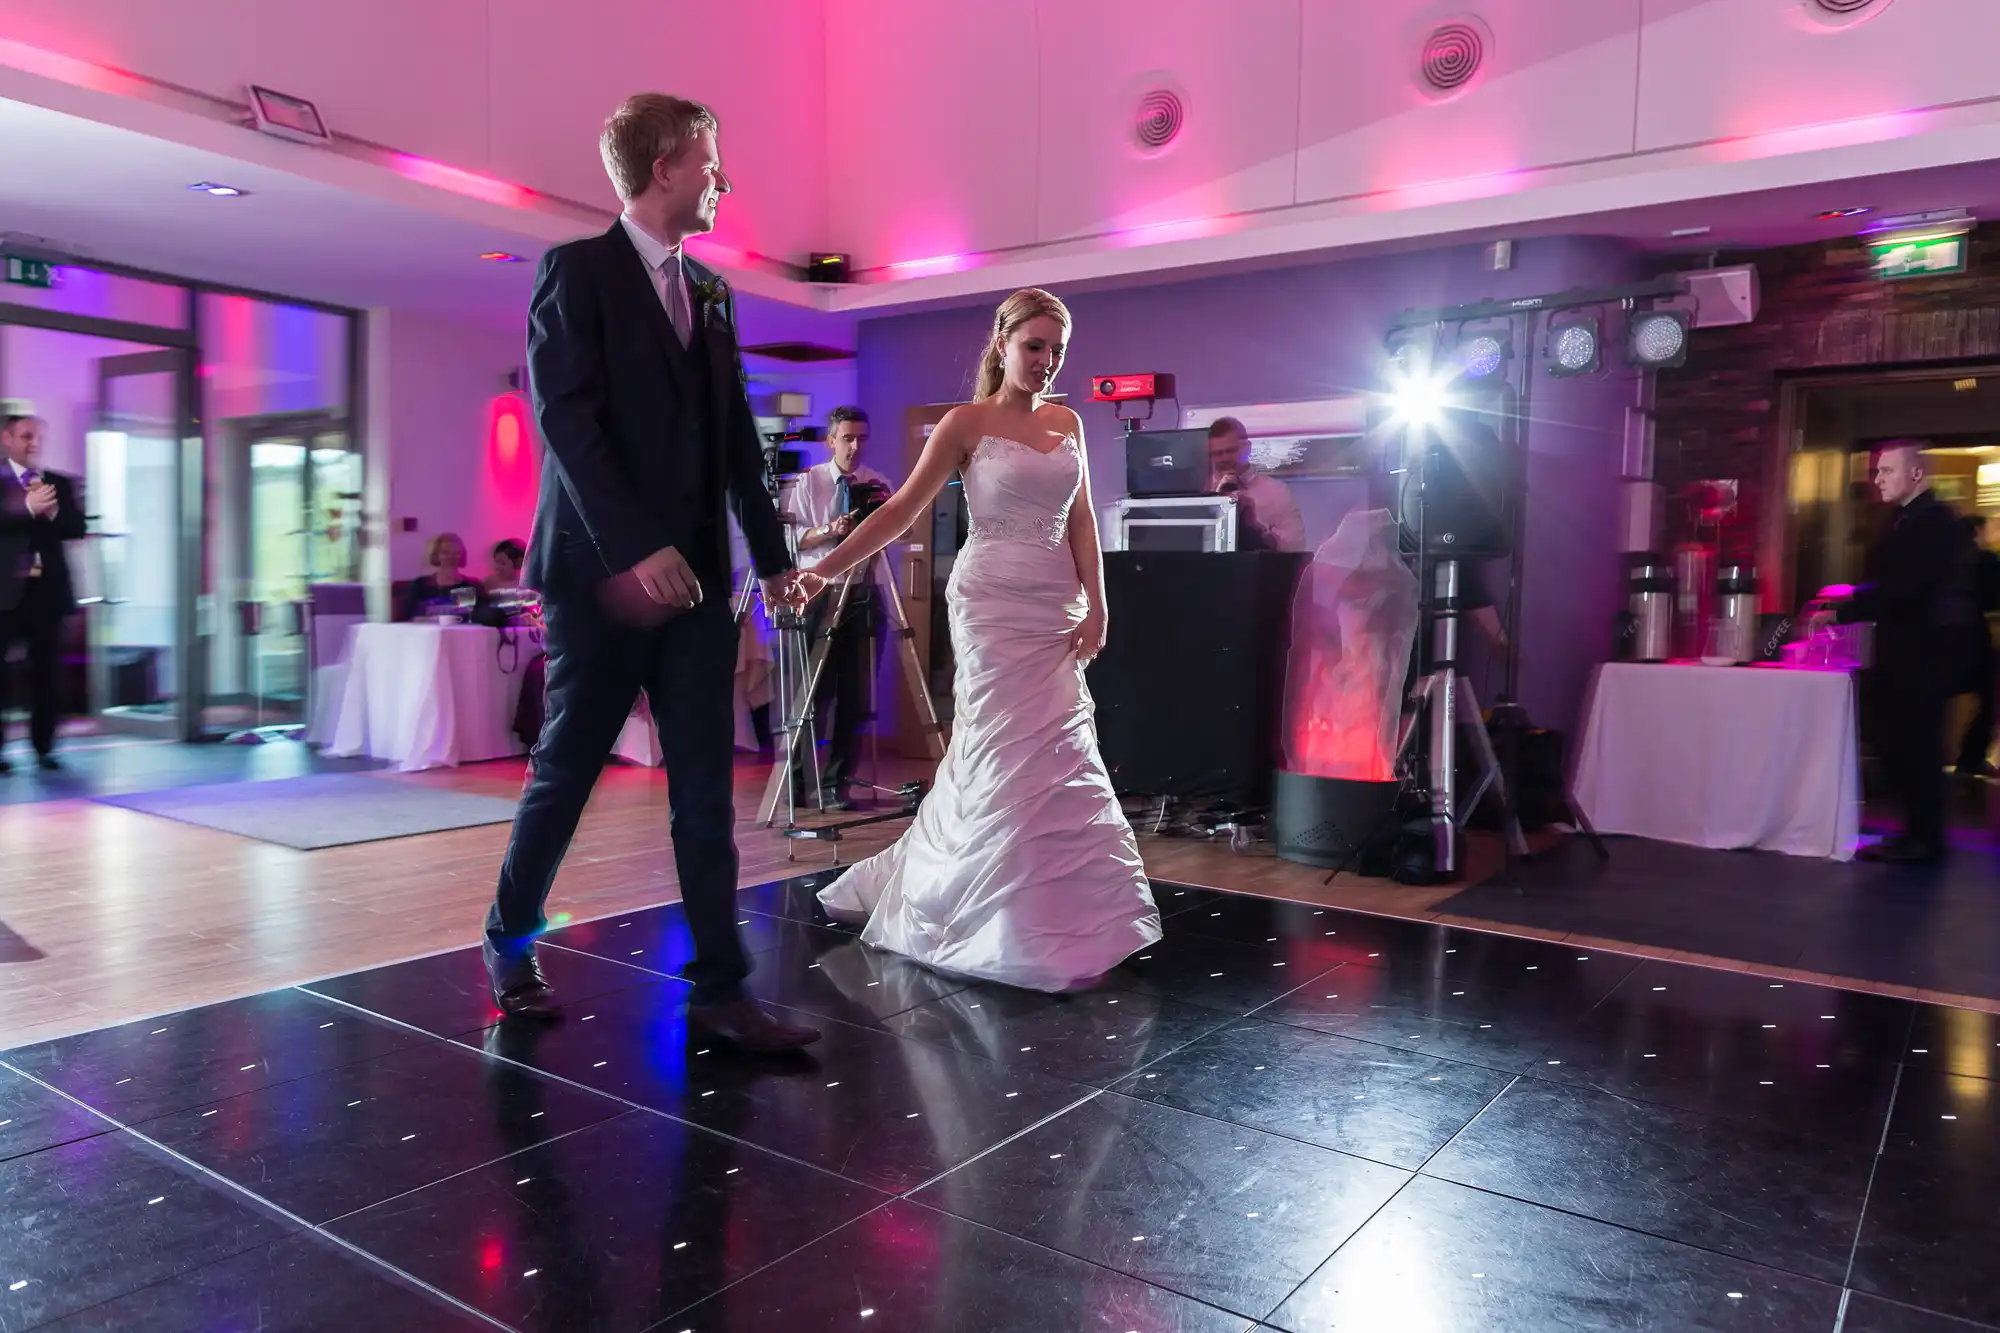 A bride and groom holding hands and dancing at their wedding reception, surrounded by guests and colorful lighting.